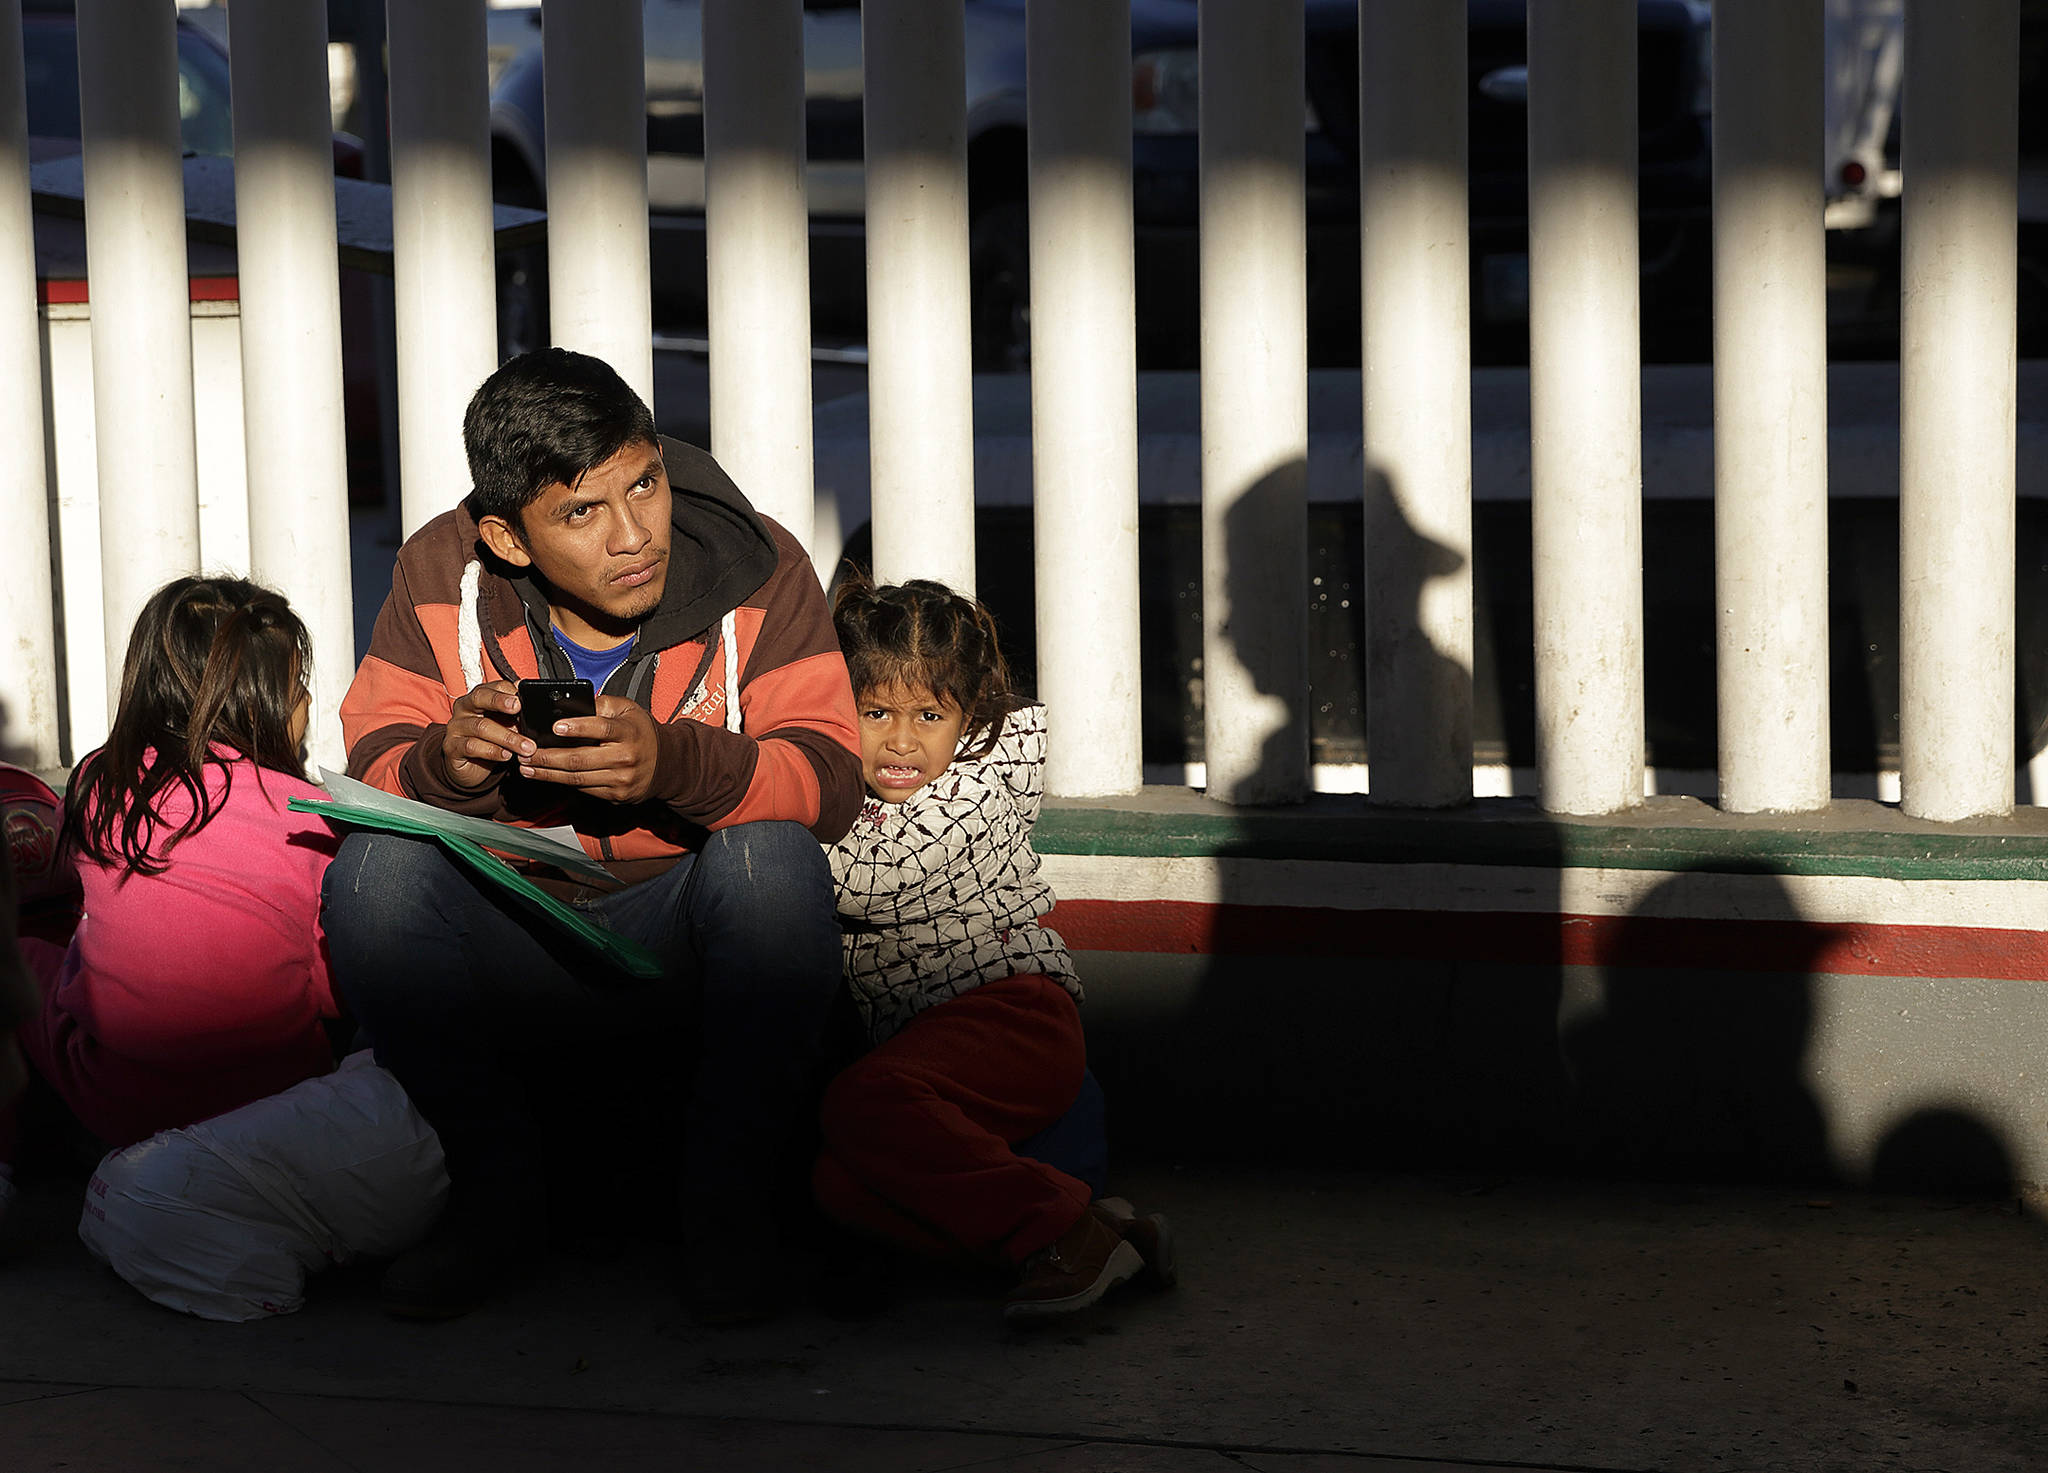 In this Jan. 25 photo, a migrant who did not give his name looks on with his children as they wait to hear if their number is called to apply for asylum in the United States, at the border in Tijuana, Mexico. (AP Photo/Gregory Bull, File)